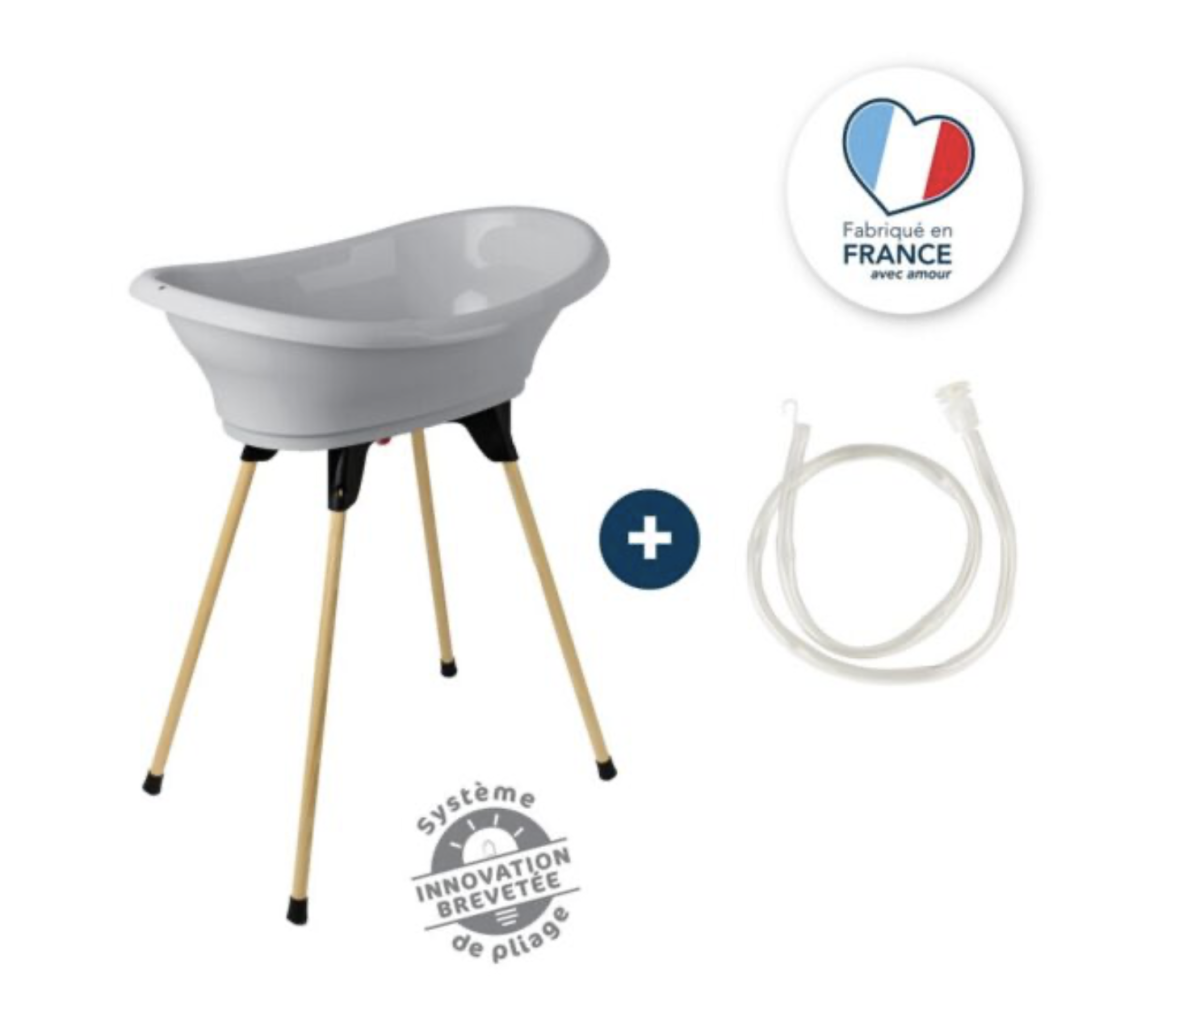 Réducteur WC Luxe, Thermobaby de Thermobaby